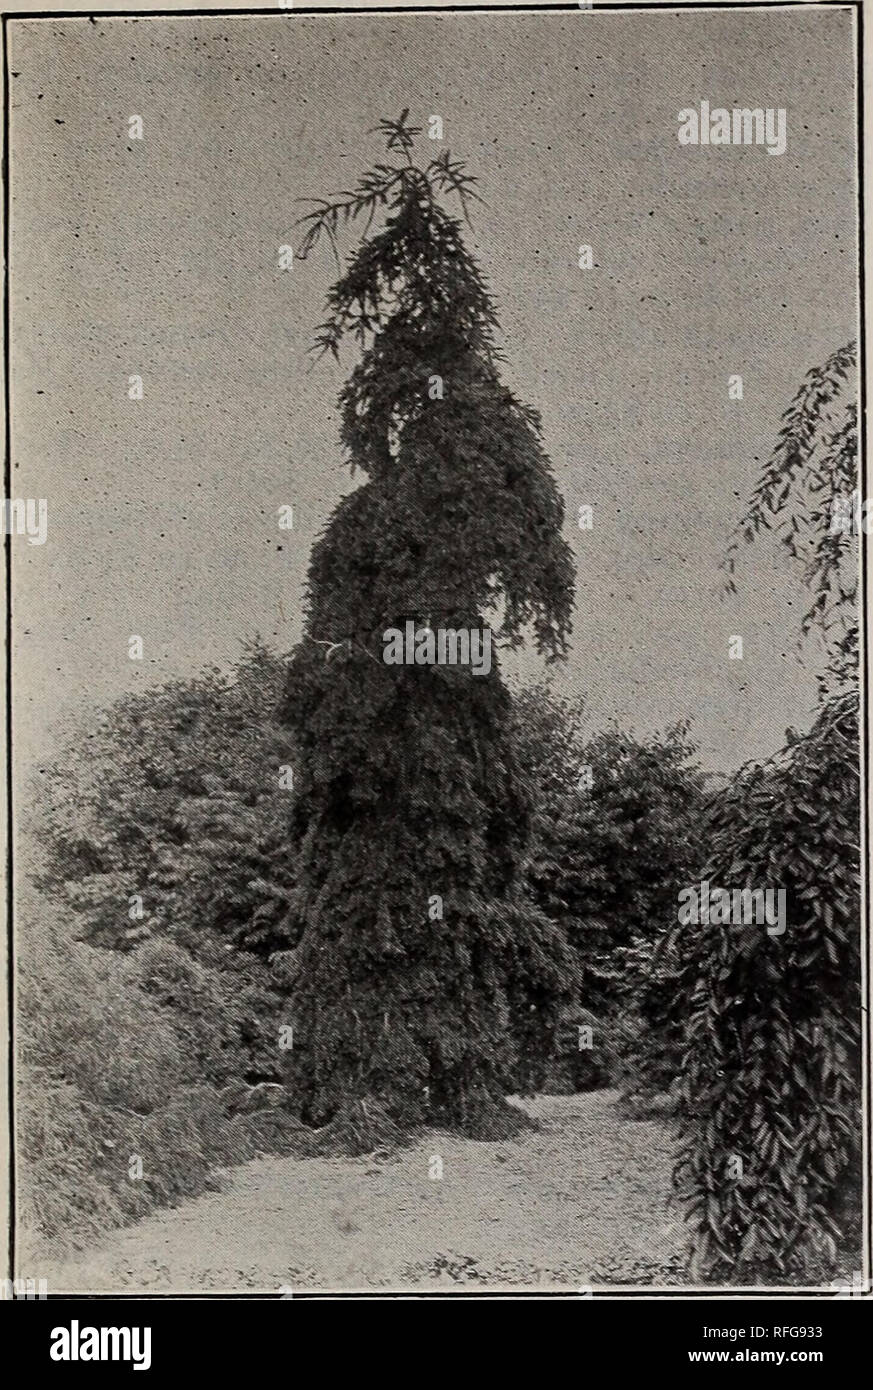 . Catalogue of Dutch, French, Japanese and other bulbs :. Nursery stock New Jersey Rutherford Catalogs; Bulbs (Plants) Catalogs; Flowers Seeds Catalogs; Plants, Ornamental Catalogs. Evergreen Trees 23 BOBBINK &amp; ATKINS, RUTHERFORD, N. J.. Picea Escelsa Invert a. T. Hookeriana (Hooker's California Spruce). A rare and beautiful hardy variety some- what resembling- the Hemlock in growth; pale blue-green foliage, thickl}' set on the branches. Ea. $1.00 and $1.50. CEDRUS atlantica glauca. One of the most beautiful evergreens yet sent out. Upright growth, but low branched and of compact habit, wi Stock Photo